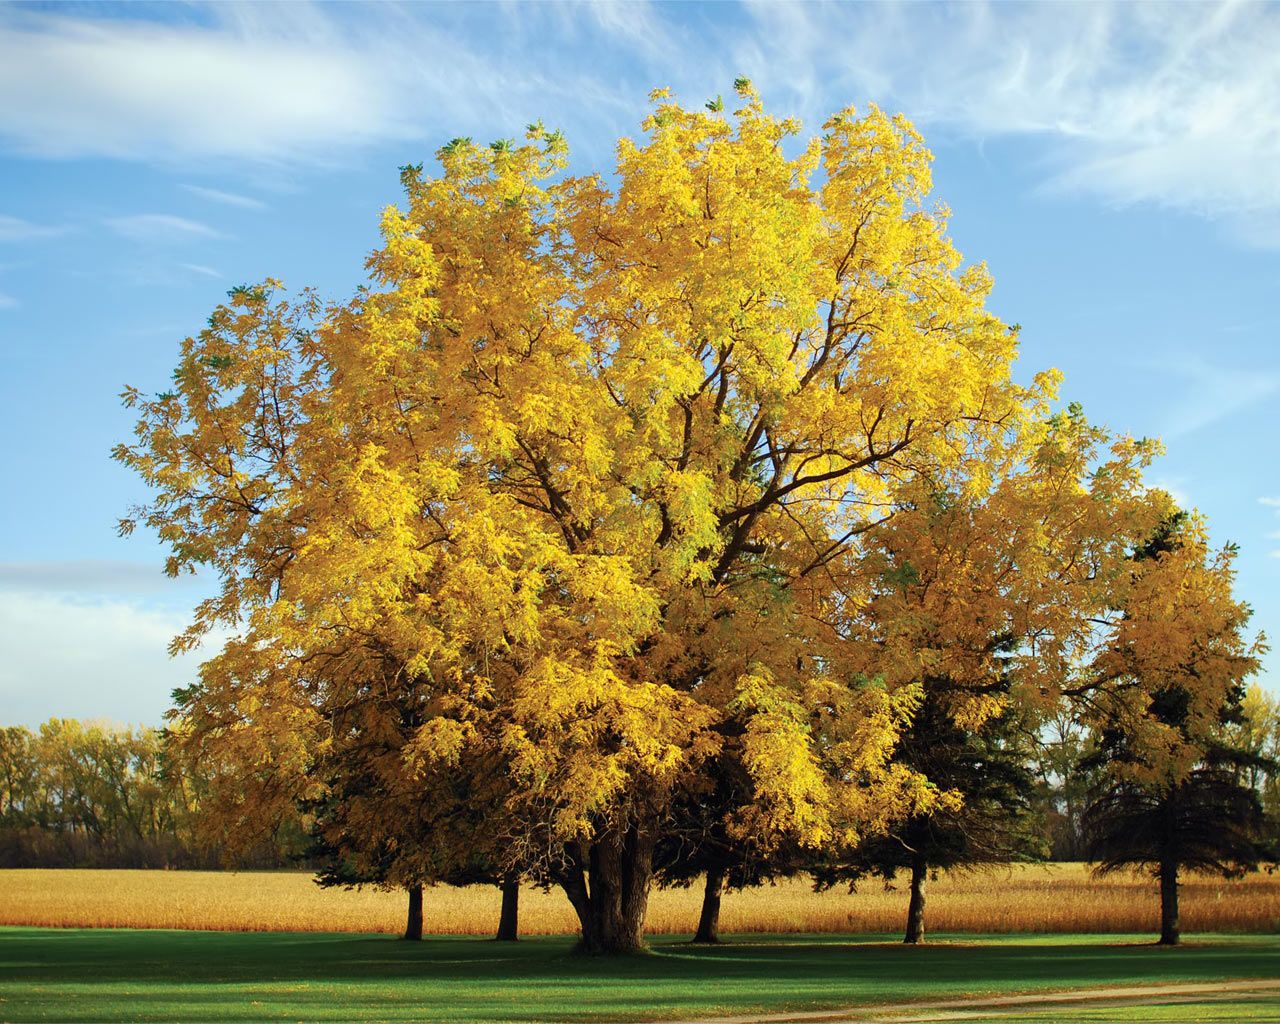 Lonely Yellow Color Autumn Tree With Blue Sky - Walnut Tree - HD Wallpaper 